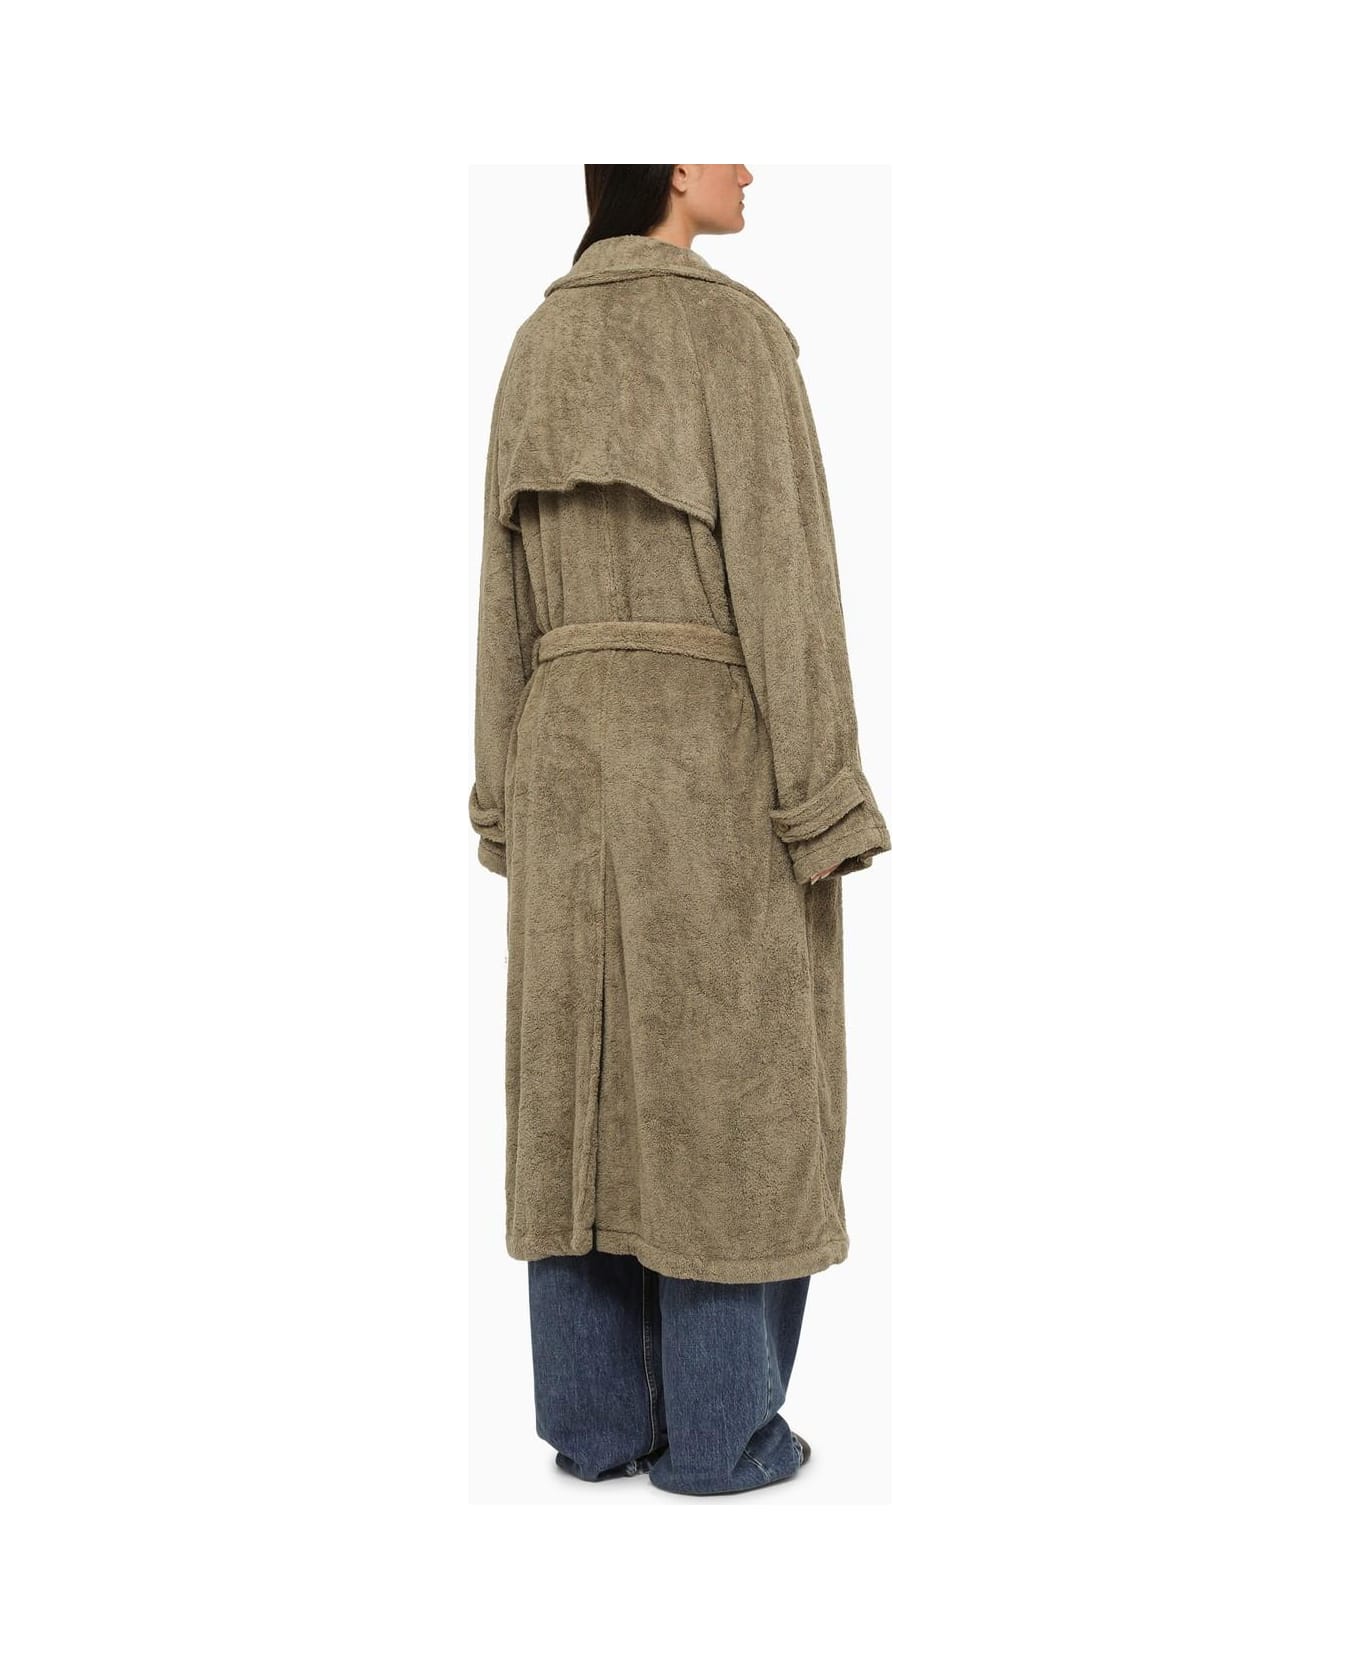 Balenciaga Towel Trench Coat In Sand-coloured Cotton - BEIGE